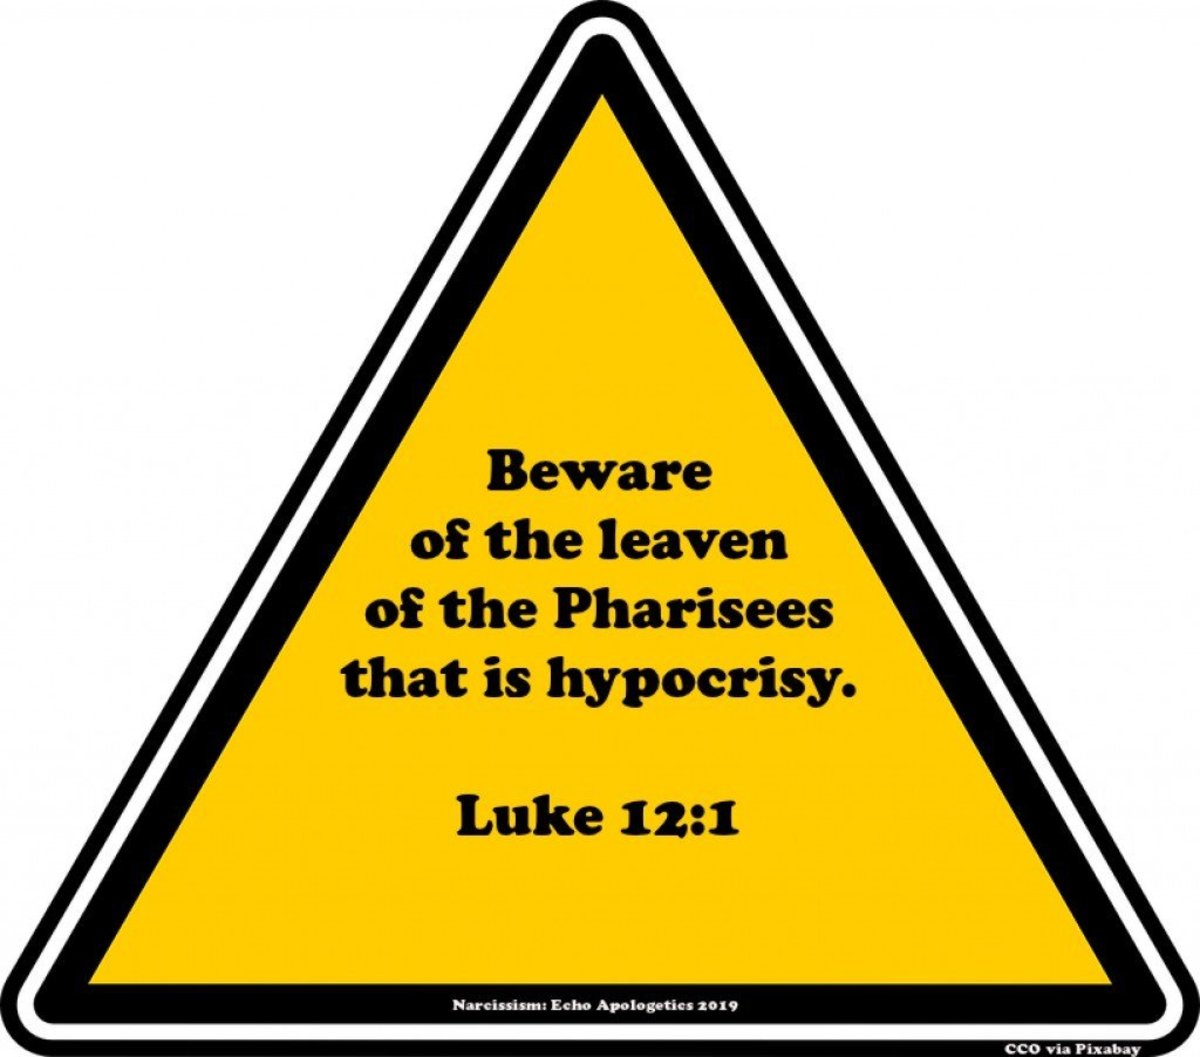 Featured Verse: Beware of the leaven of the Pharisees that is hypocrisy. - Luke 12:1